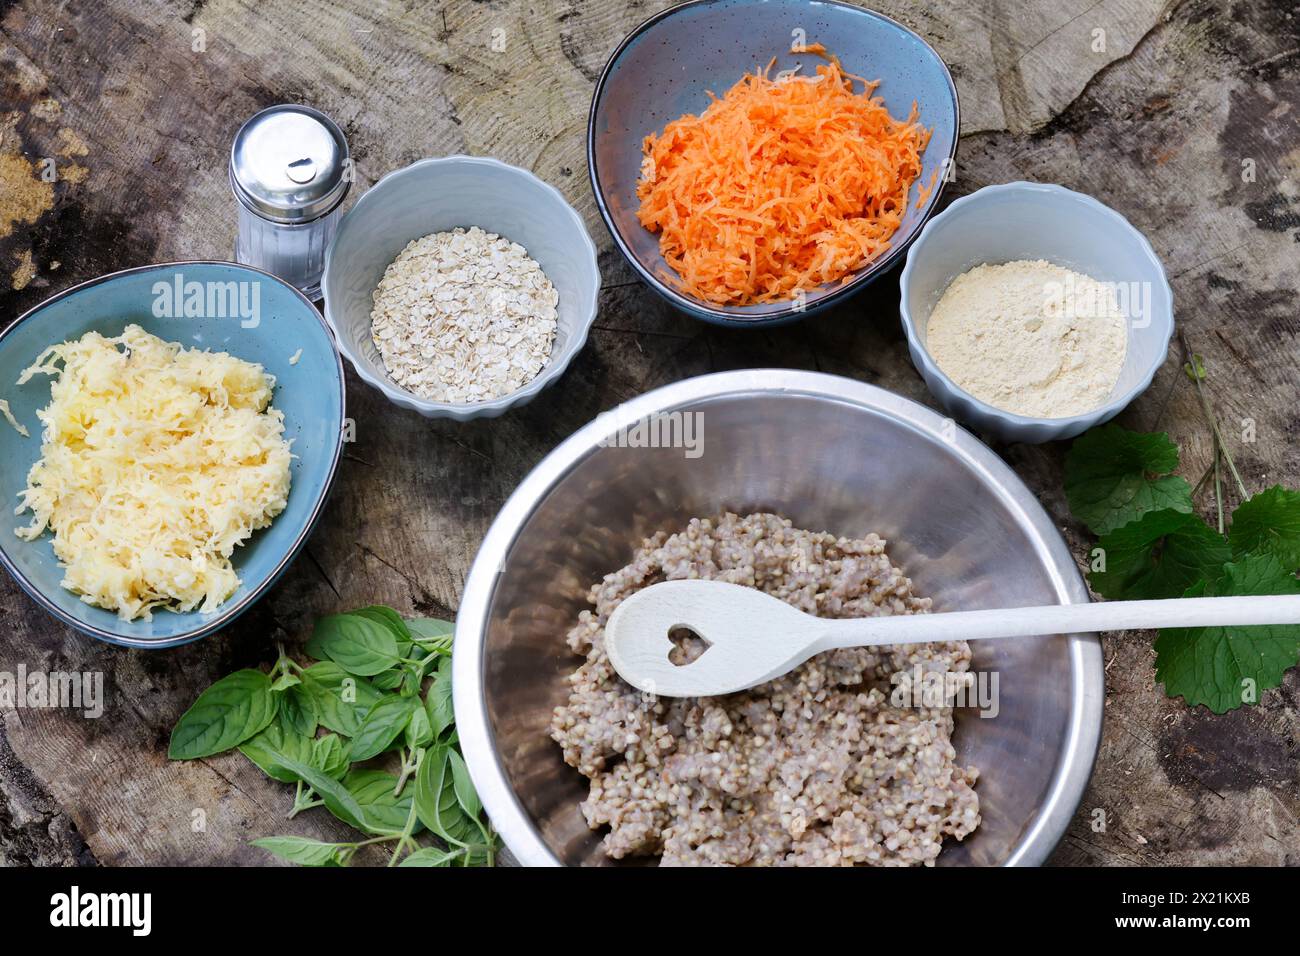 Making vegan herb patties, step 1: Ingredients; cooked buckwheat, fresh wild herbs, grated potatoes, grated carrots, chickpea flour, fine rolled oats, Stock Photo